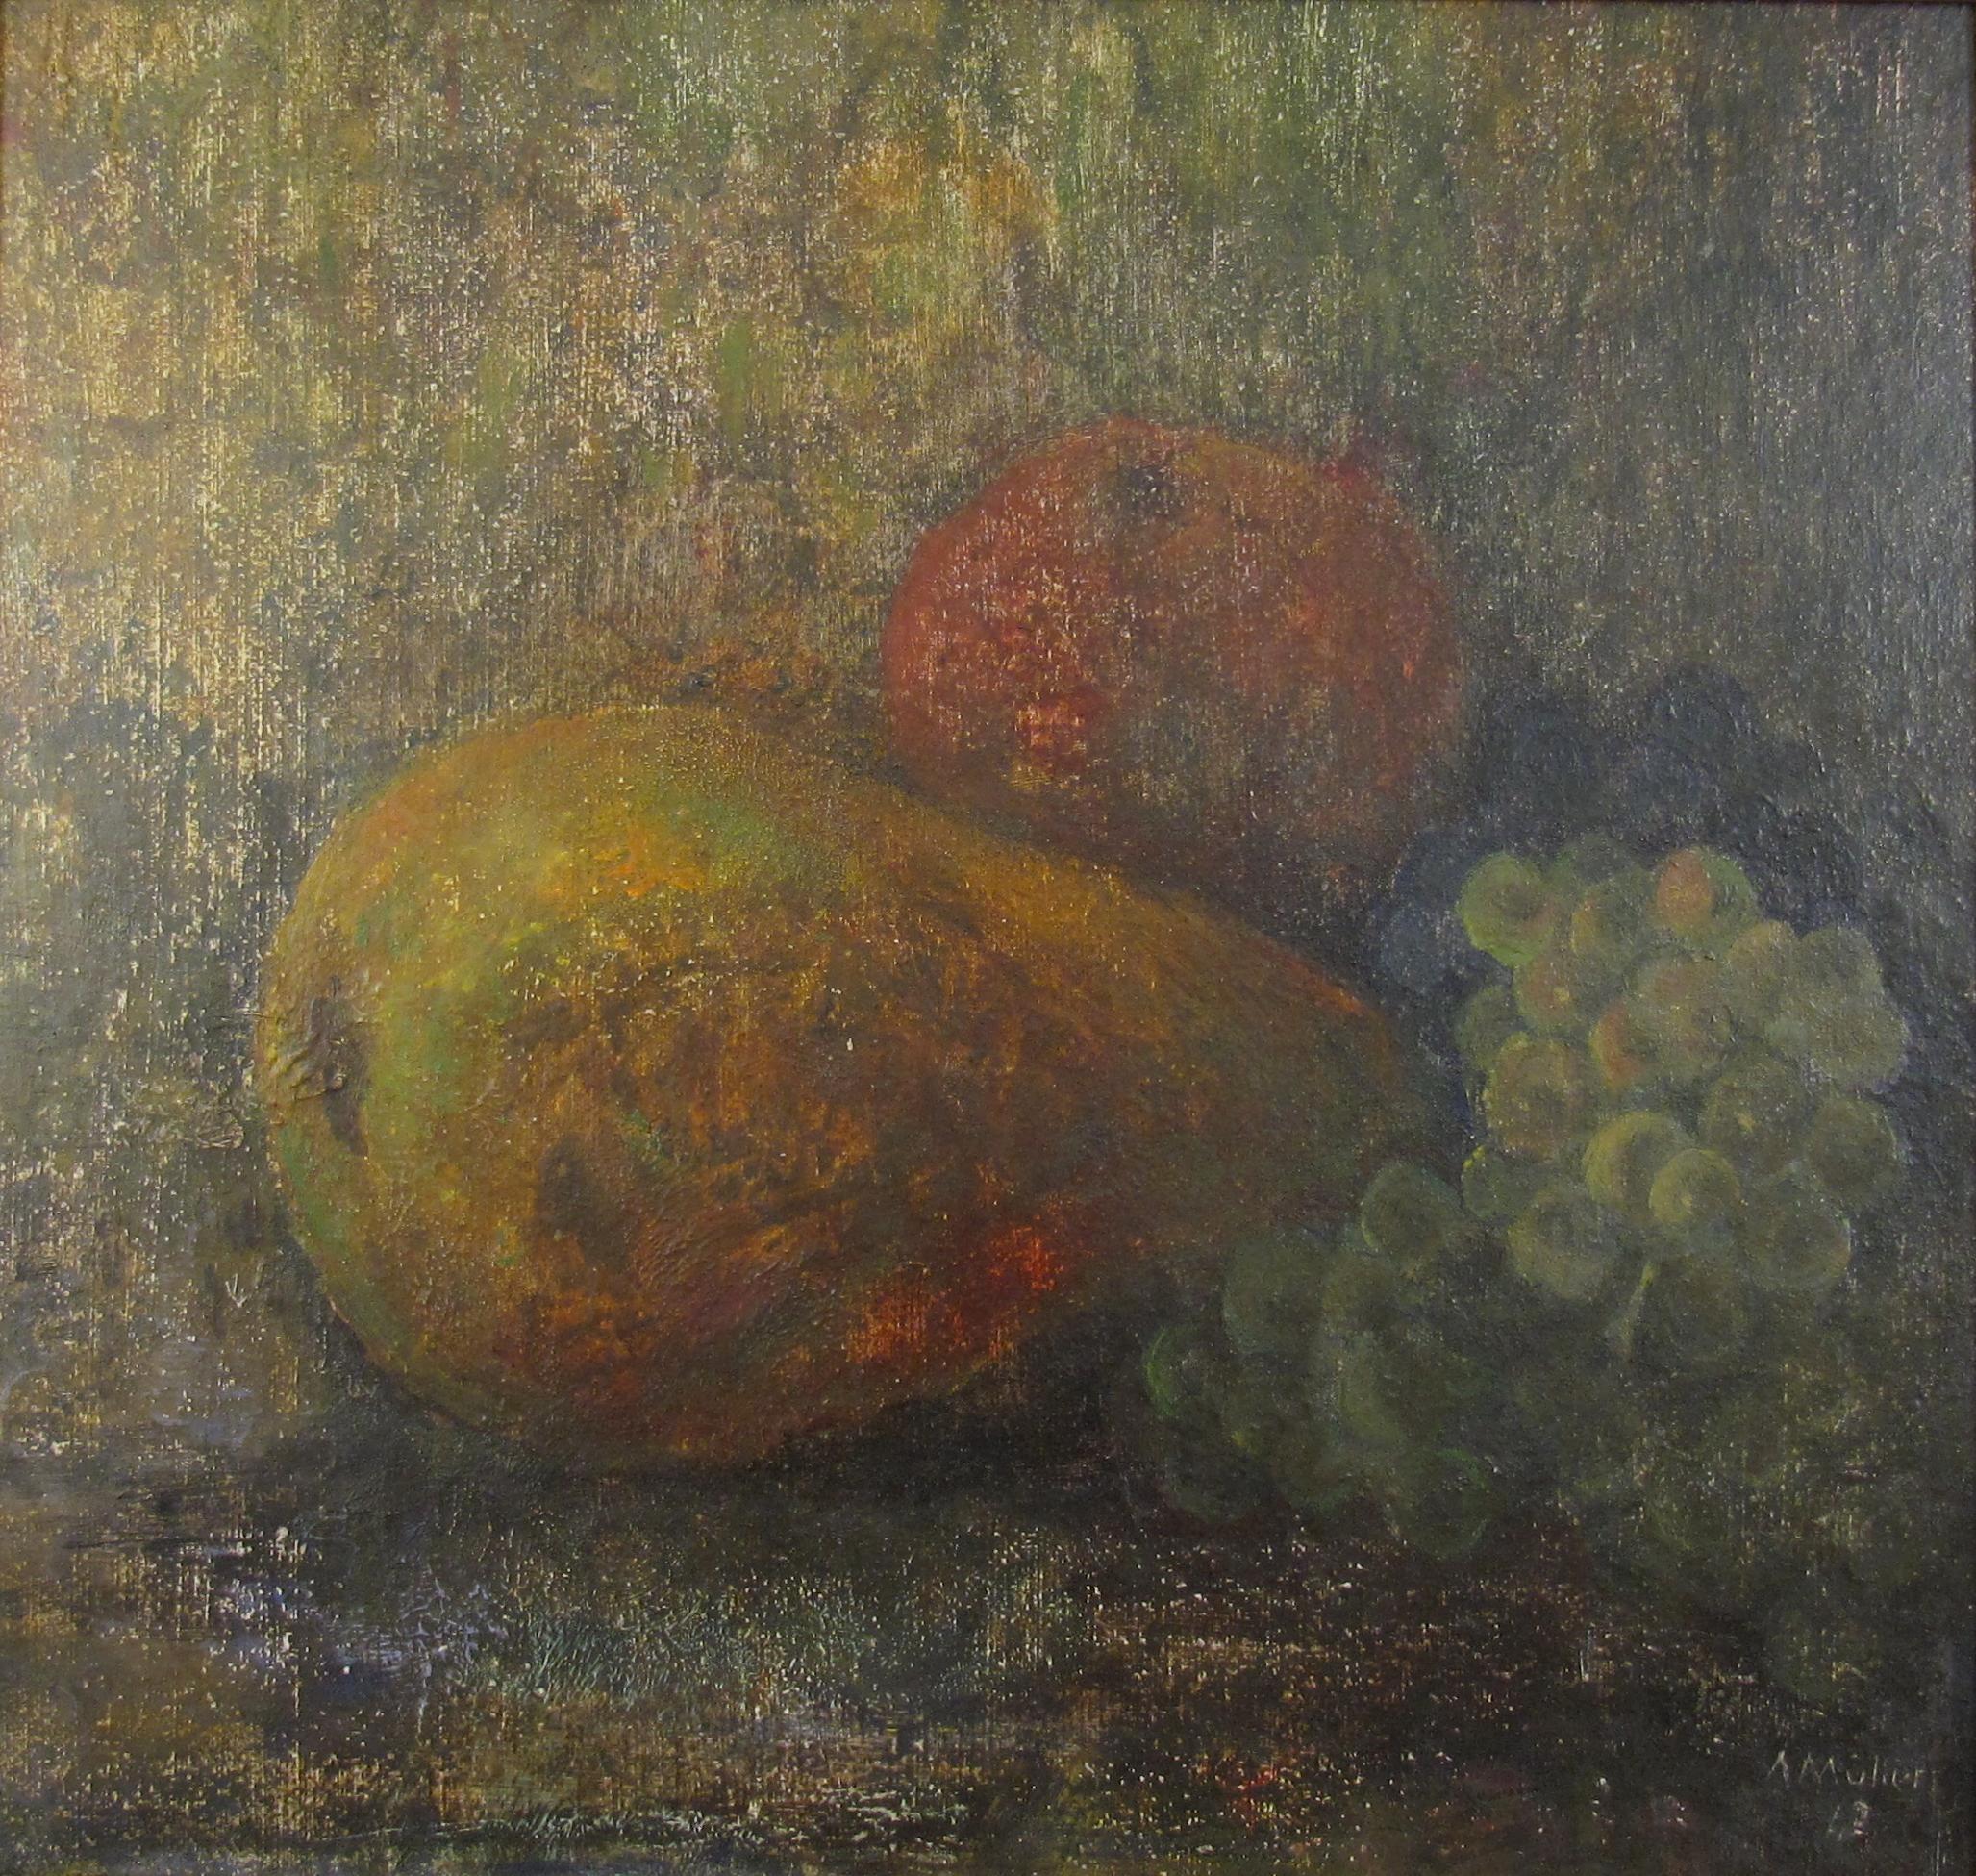 Alfons / Alphons Müller
(Swiss, * 24.8.1898 Mitlödi, † 8.6.1955 Biel)

Still Life with a Quince, an Apple and Grapes

•	Oil on artist board, ca. 31 x 33 cm
•	Frame, ca. 41 x 43 cm
•	Signed and dated (19)42 bottom right
•	Worldwide shipping is